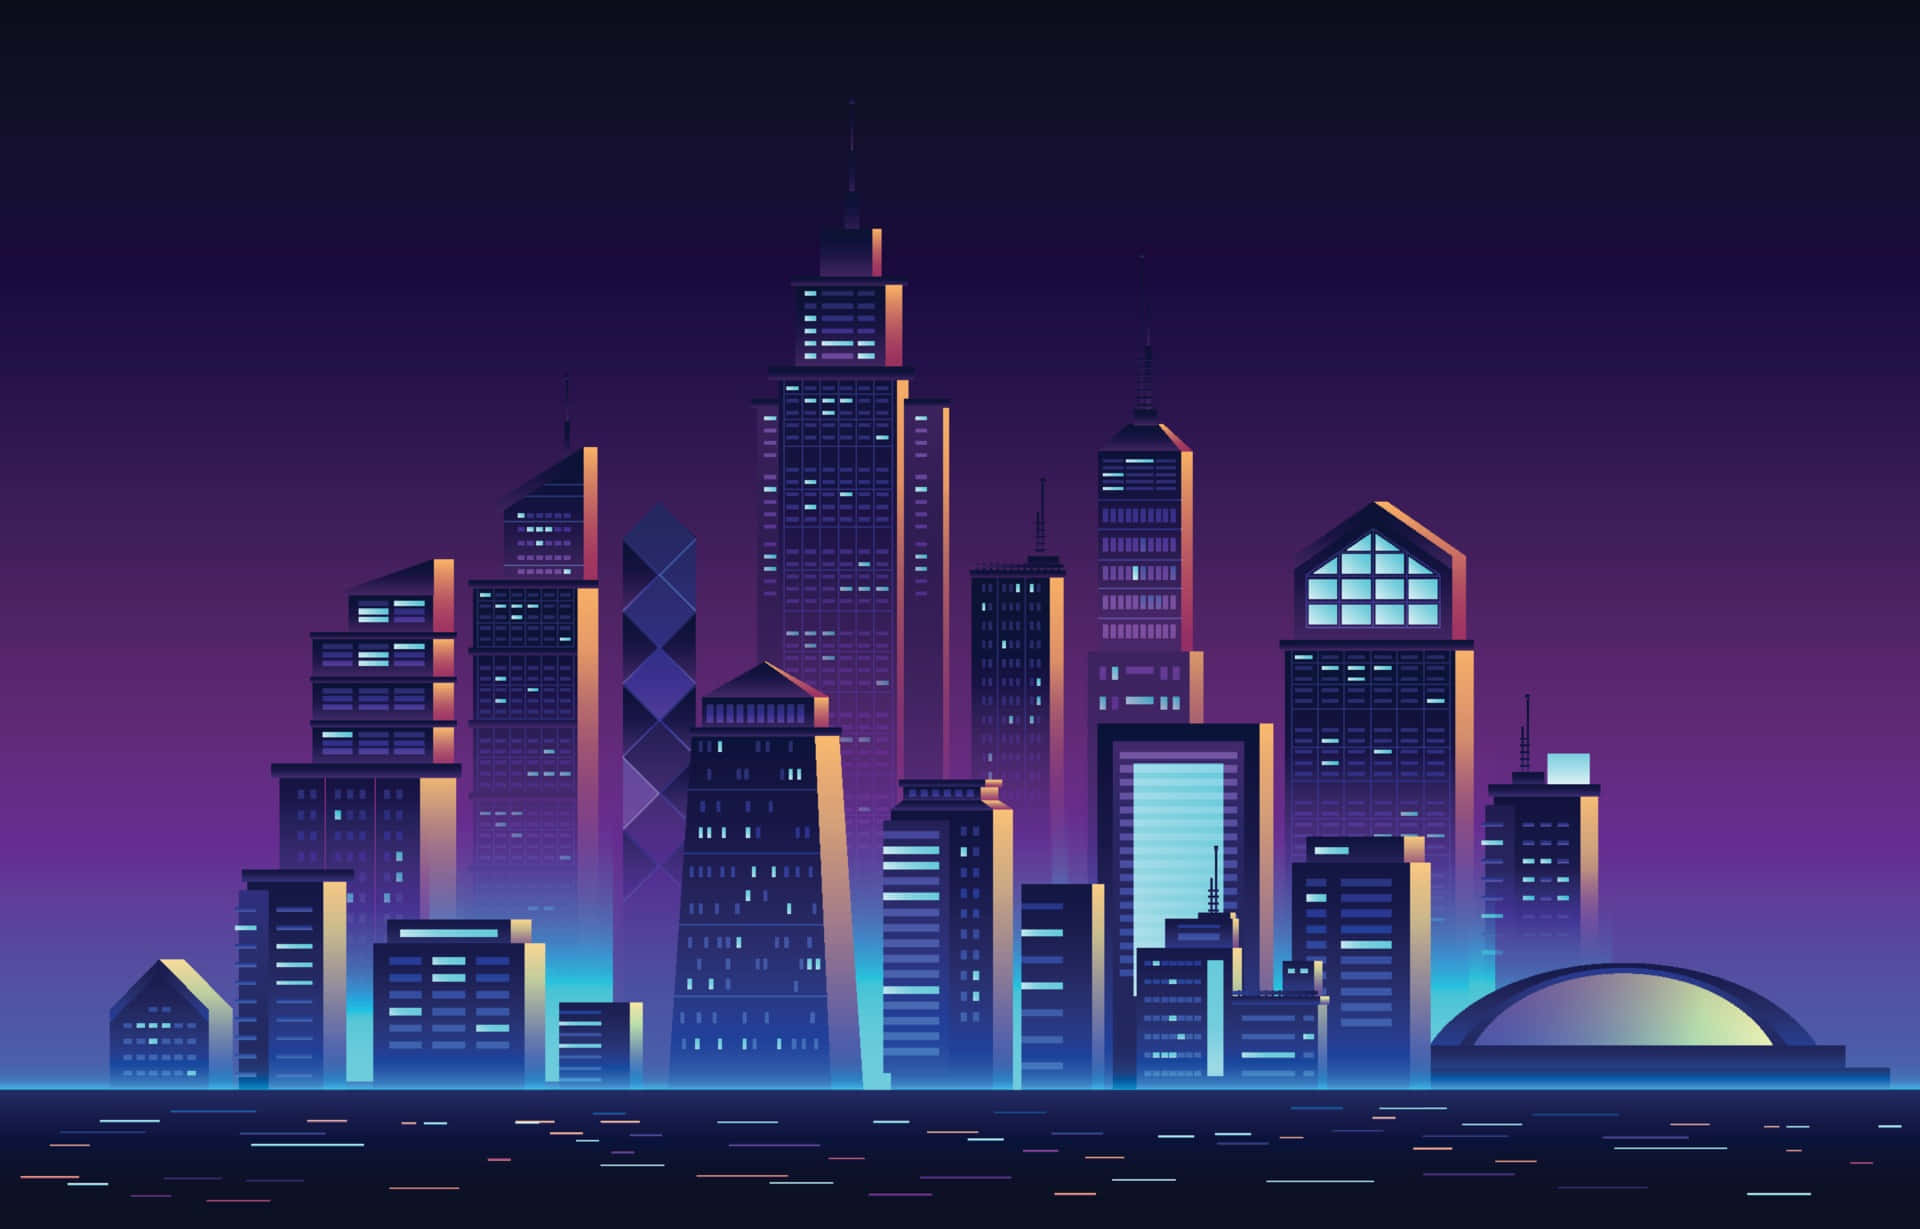 A Look into an Epic Futuristic City